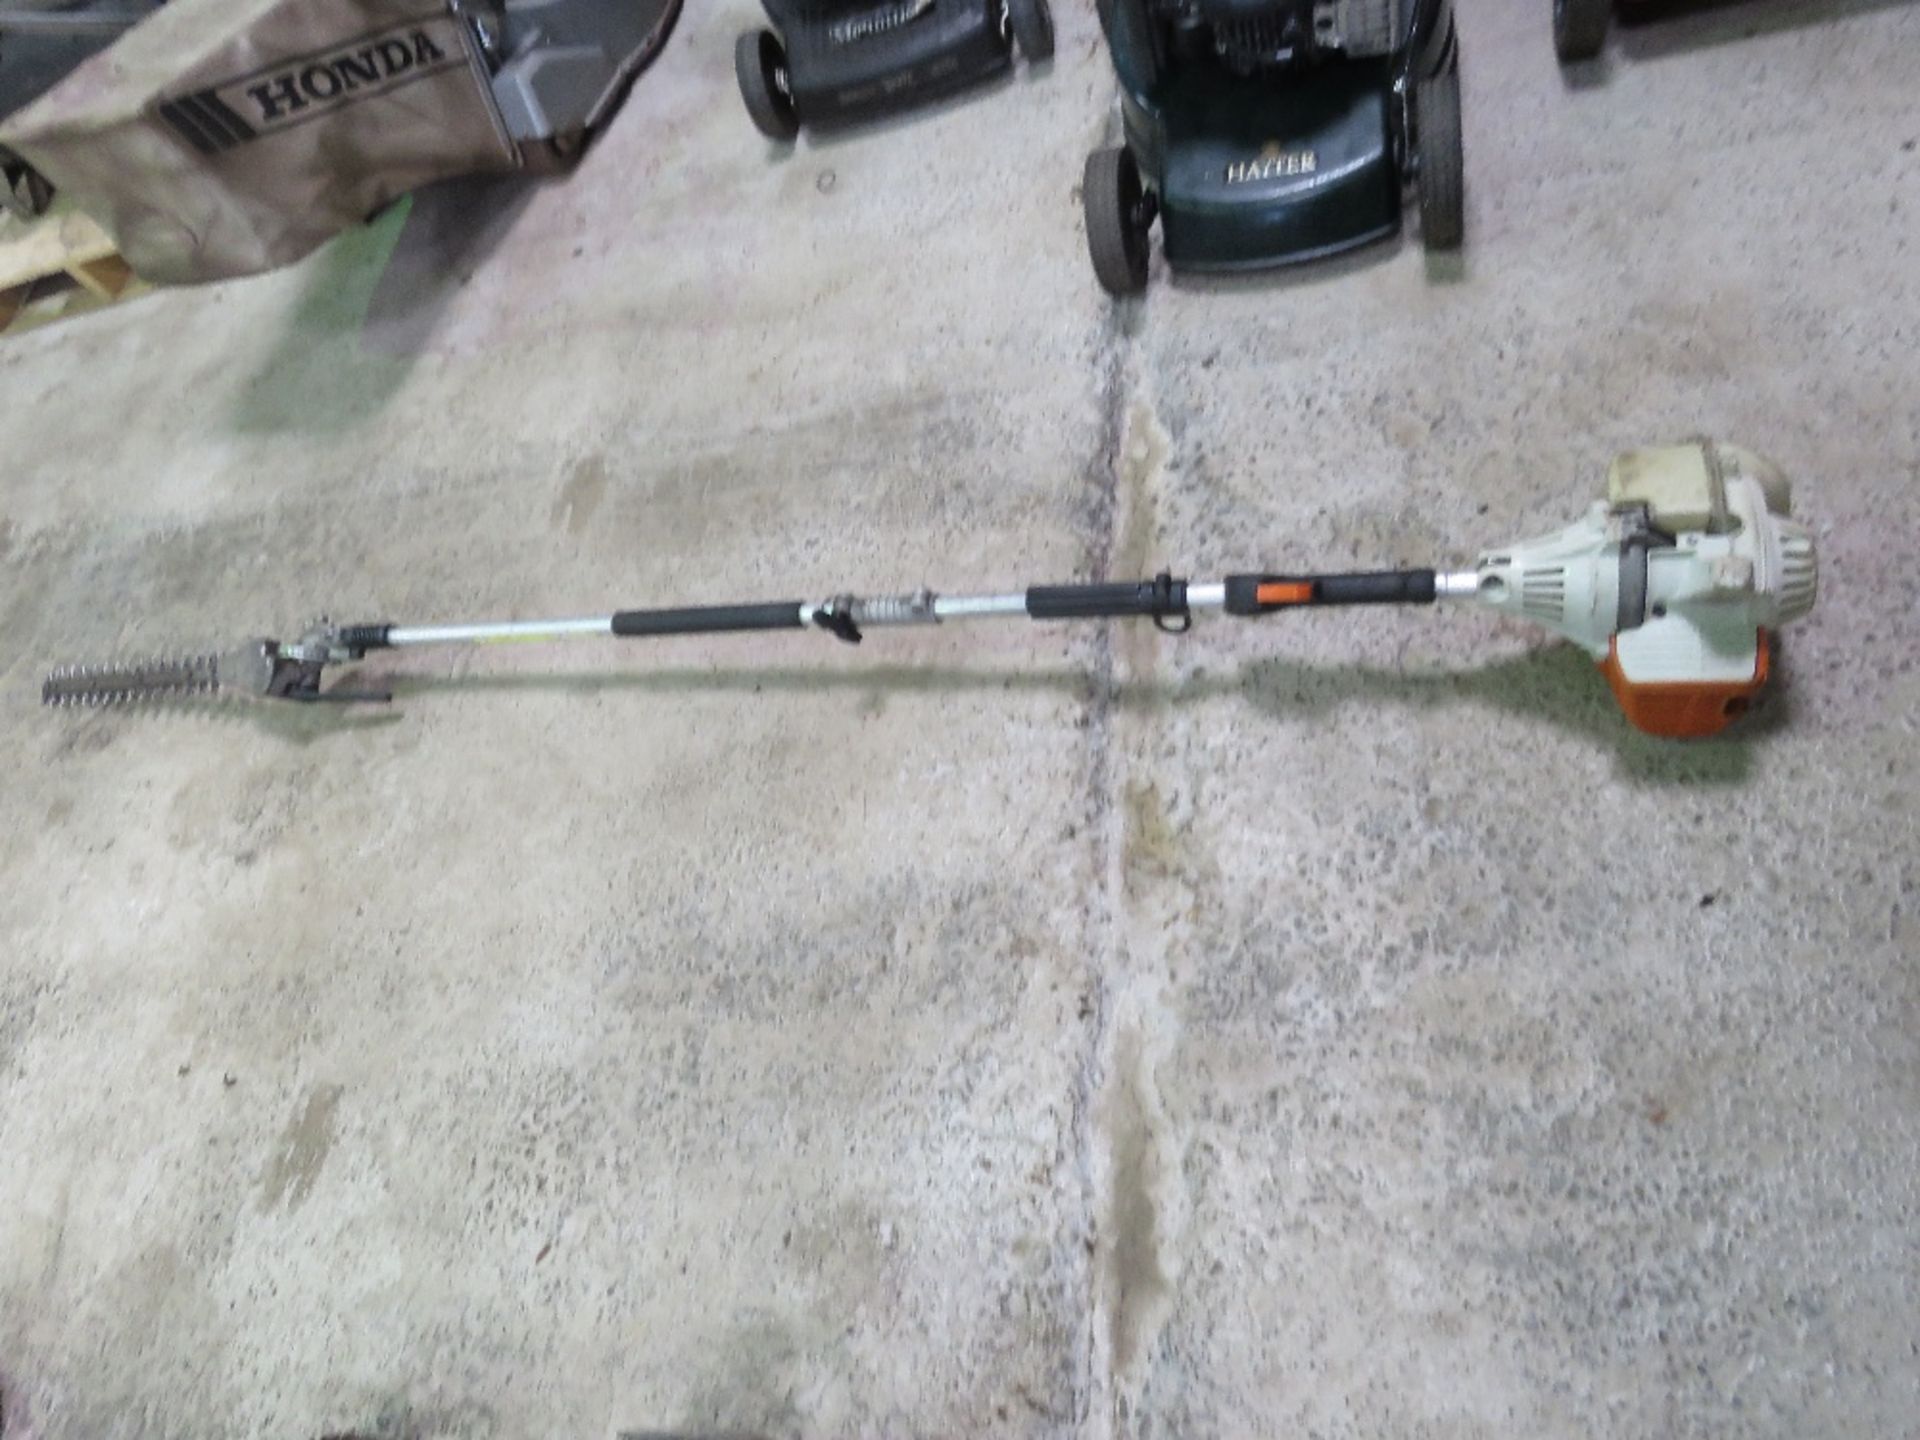 STIHL LONG REACH PETROL ENGINED HEDGE CUTTER. THIS LOT IS SOLD UNDER THE AUCTIONEERS MARGIN SCHEME, - Image 2 of 3